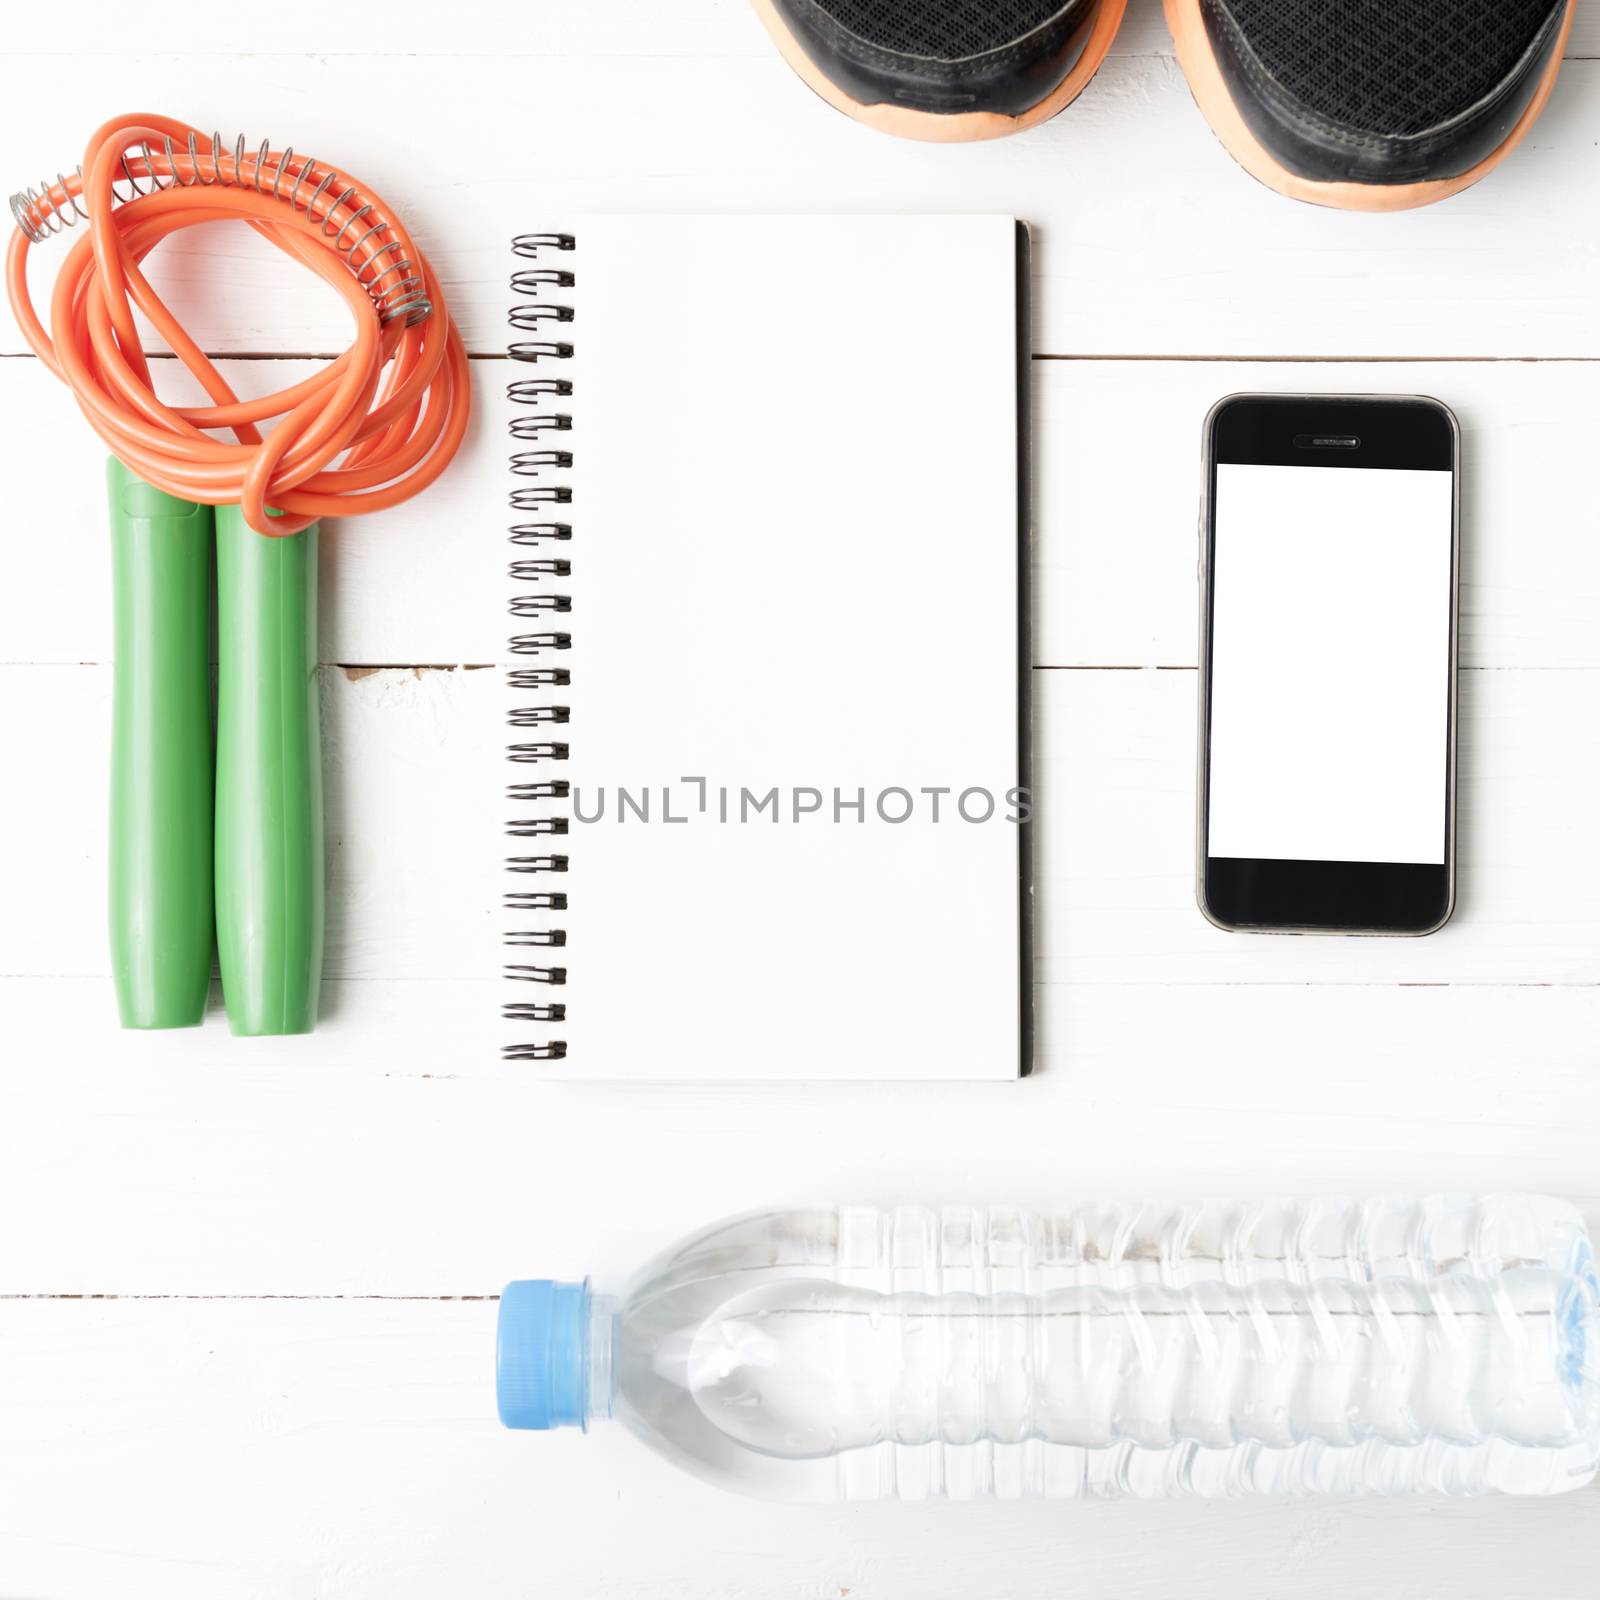 fitness equipment : running shoes,jumping rope,drinking water,notebook and phone on white wood table